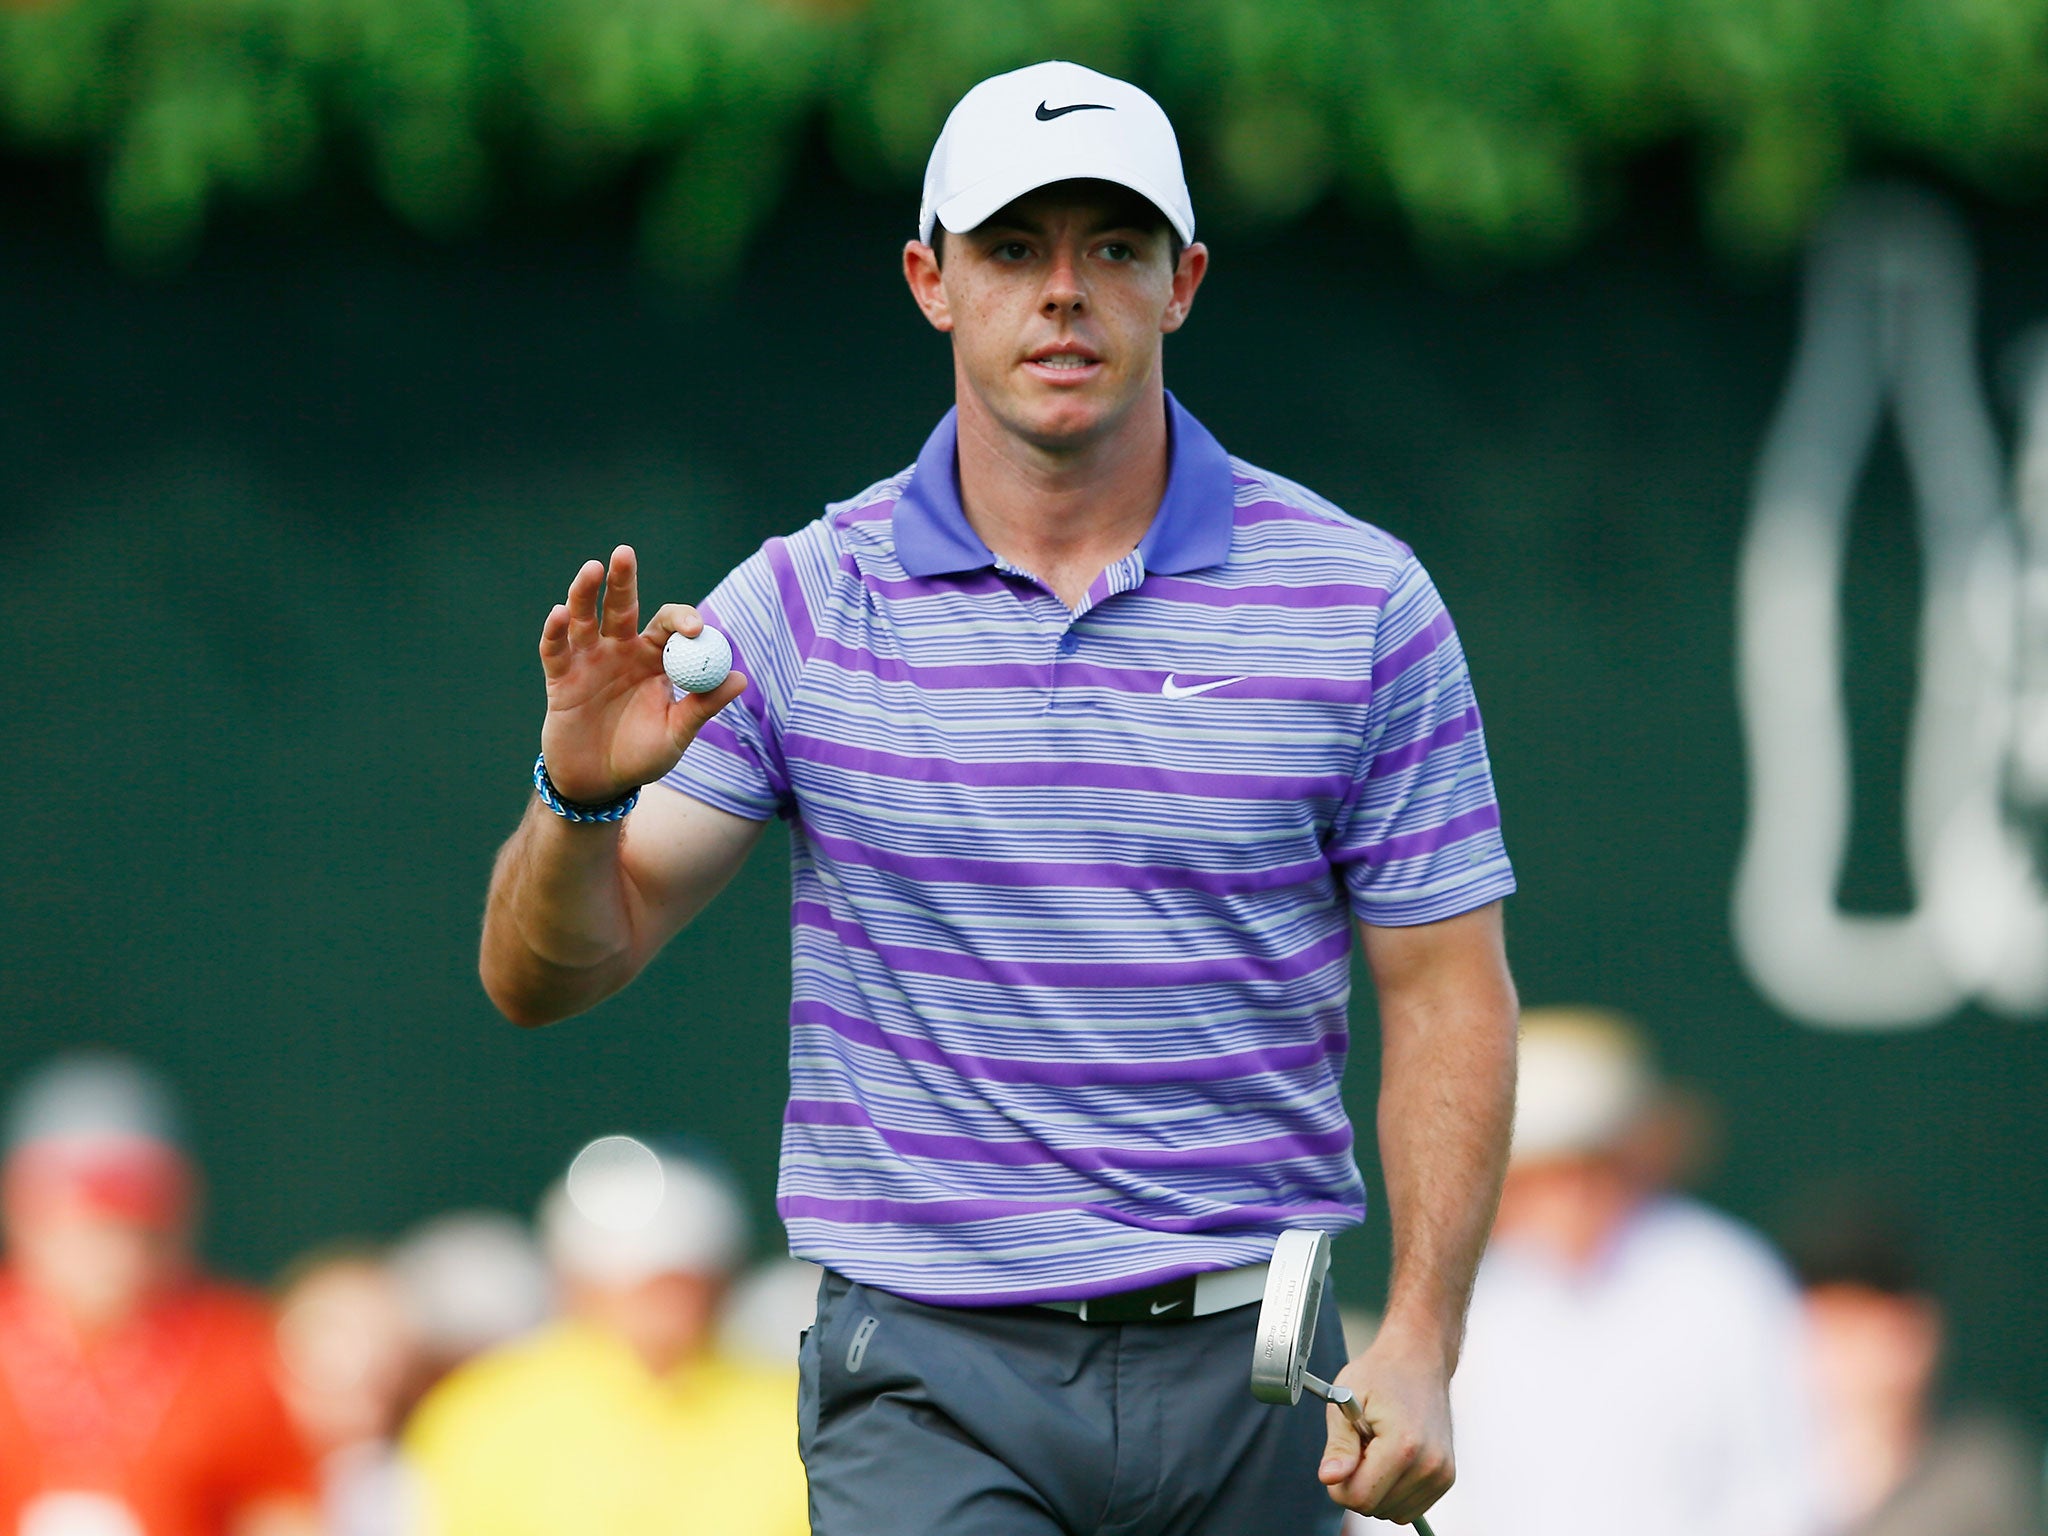 Rory McIlroy on his way to a first round 69 at the Tour Championship